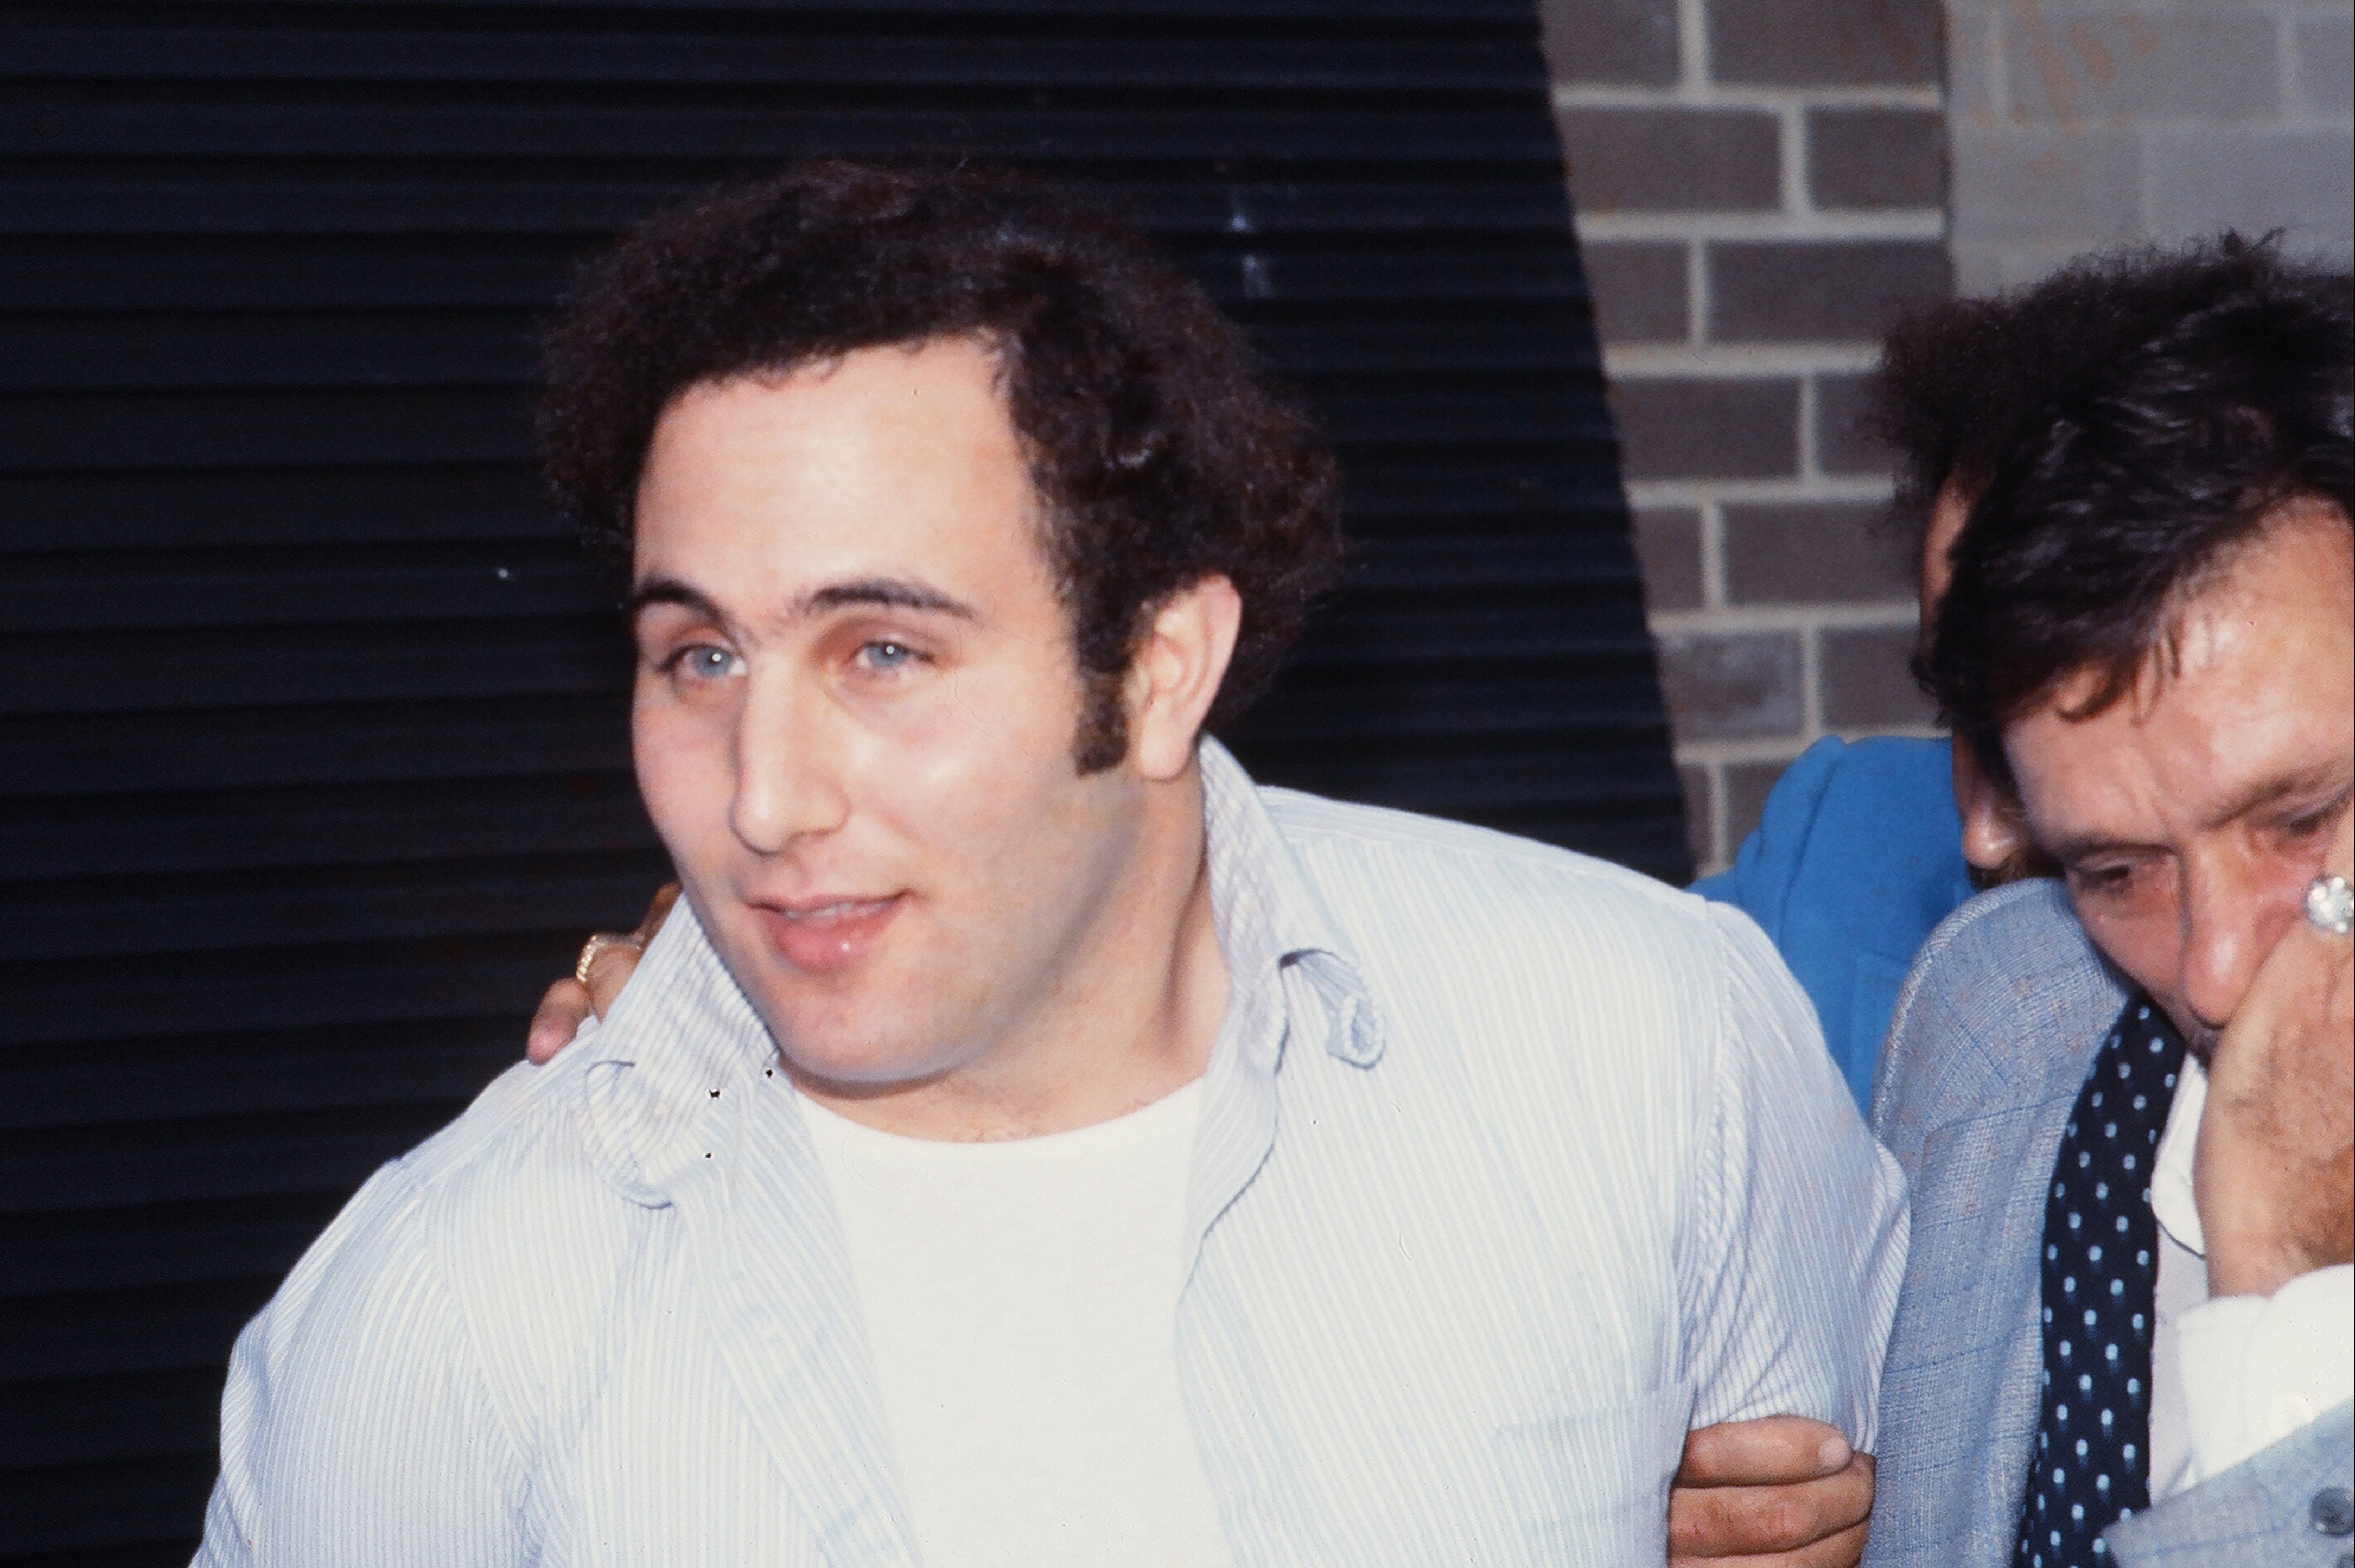 Police officers escort serial killer David Berkowitz, known as the Son of Sam, into the 84th precinct station on August 10, 1977.